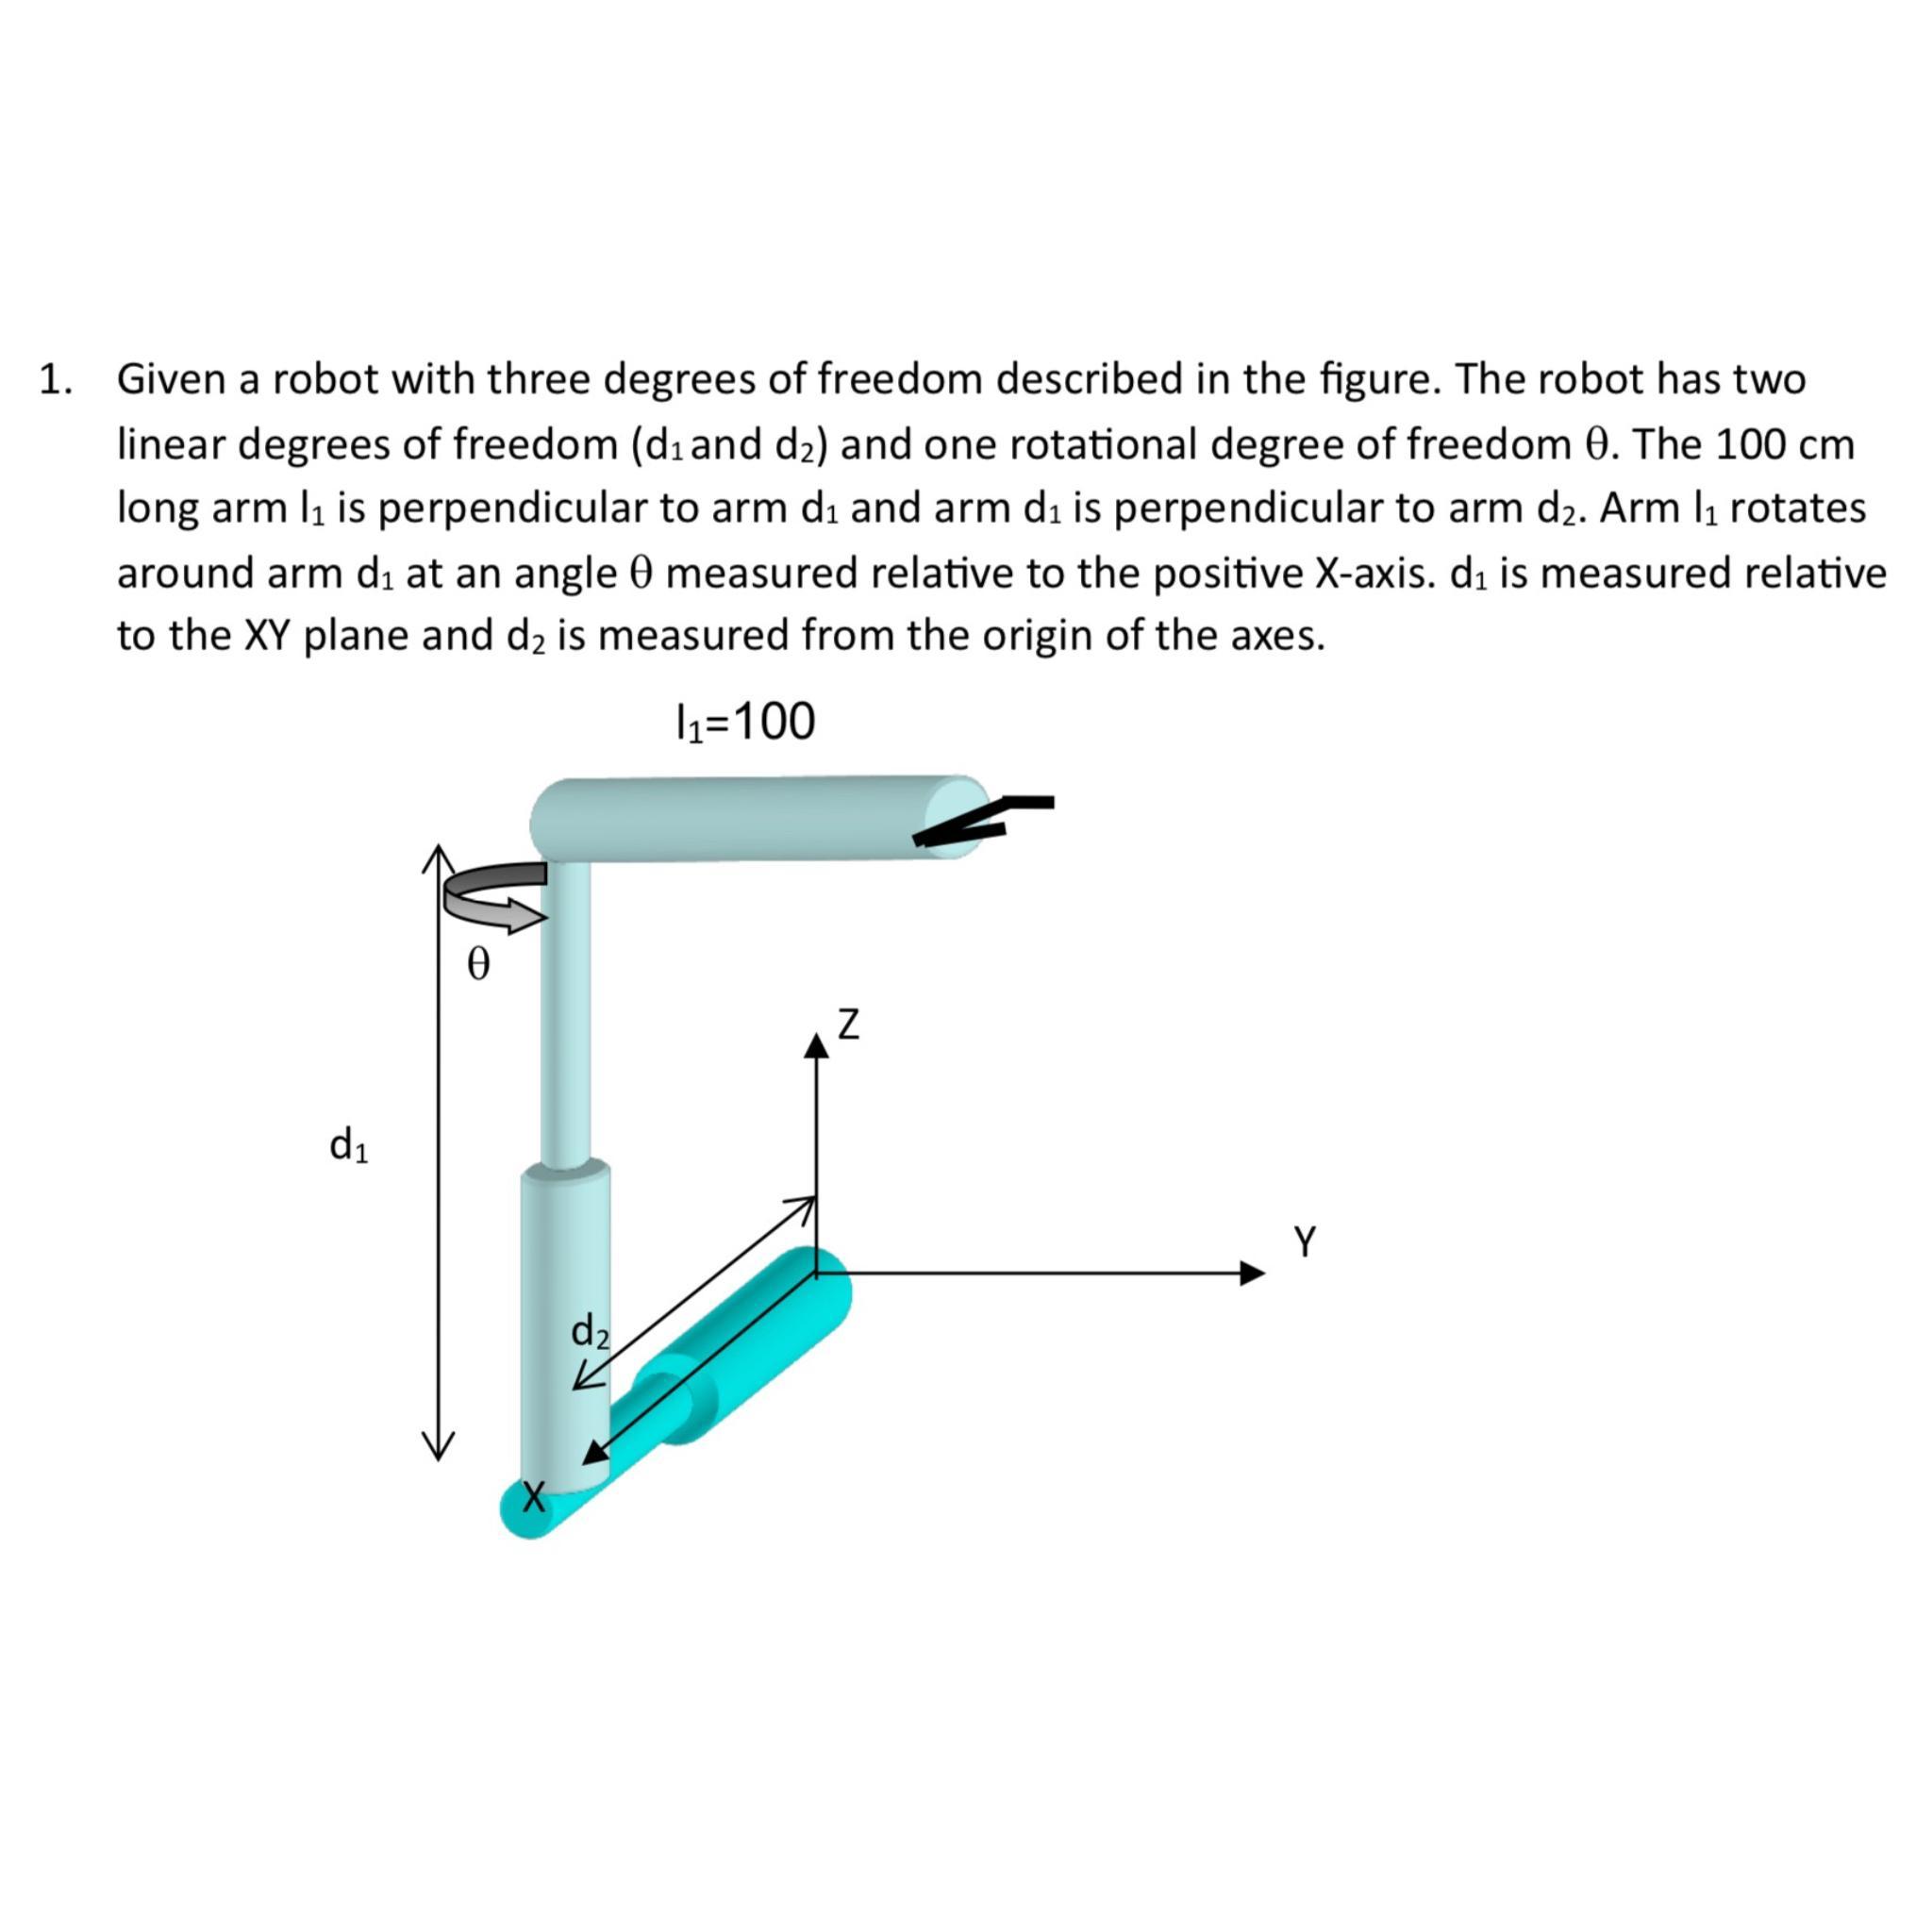 1. Given a robot with three degrees of freedom described in the figure. The robot has two linear degrees of